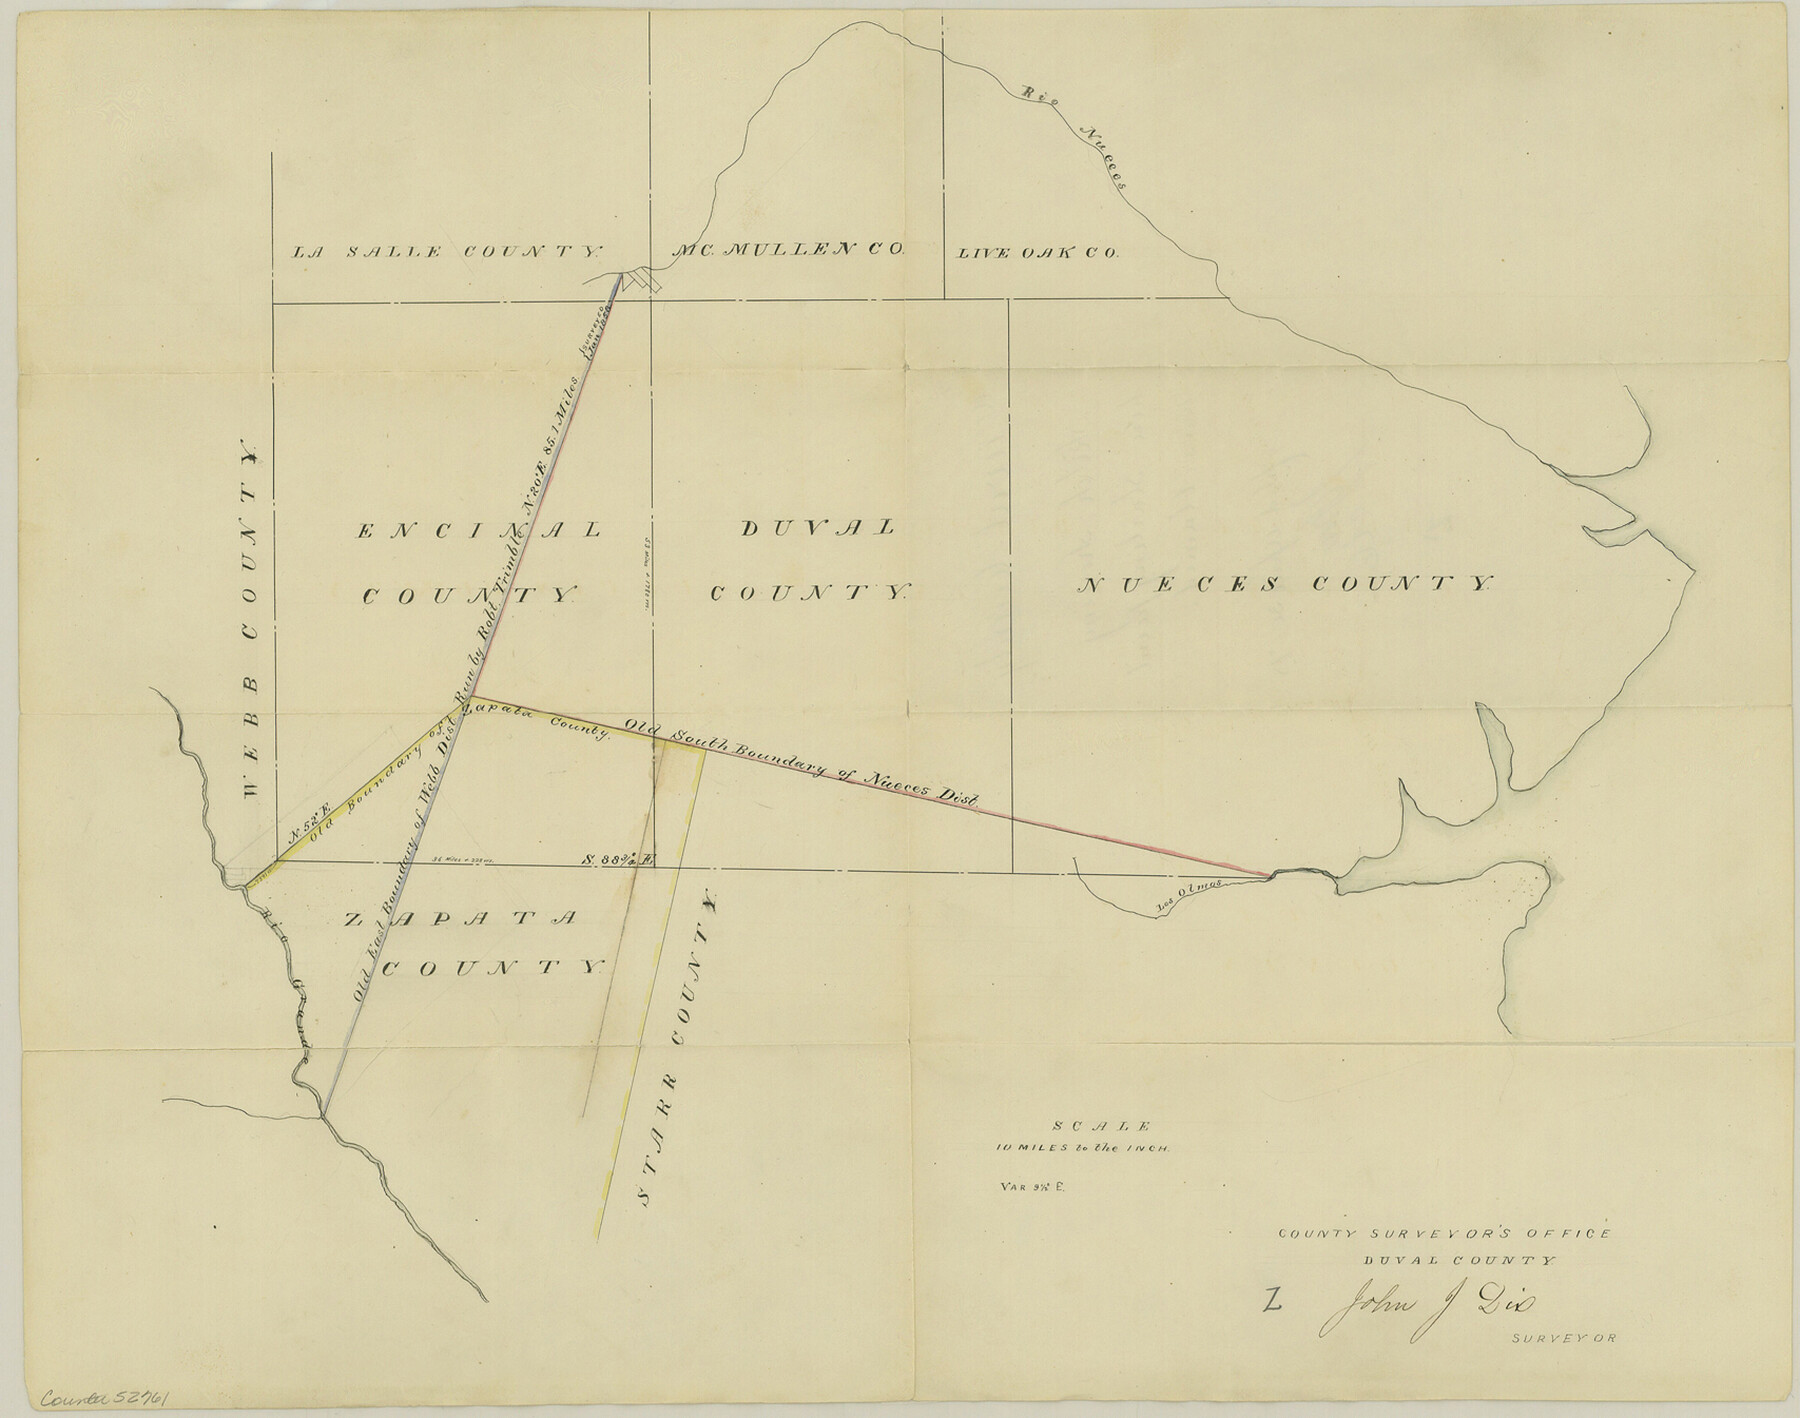 52761, Duval County Boundary File 3l, General Map Collection